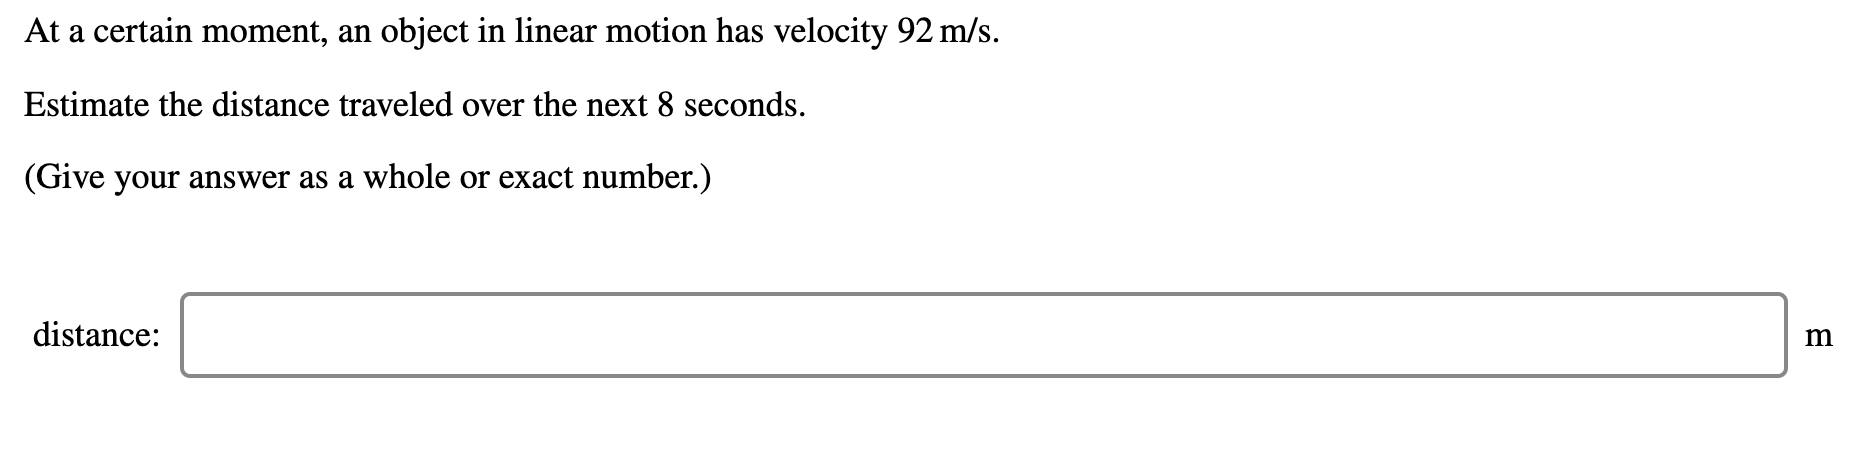 At a certain moment, an object in linear motion has velocity 92 m/s.
Estimate the distance traveled over the next 8 seconds.
(Give your answer as a whole or exact number.)
distance:
m
